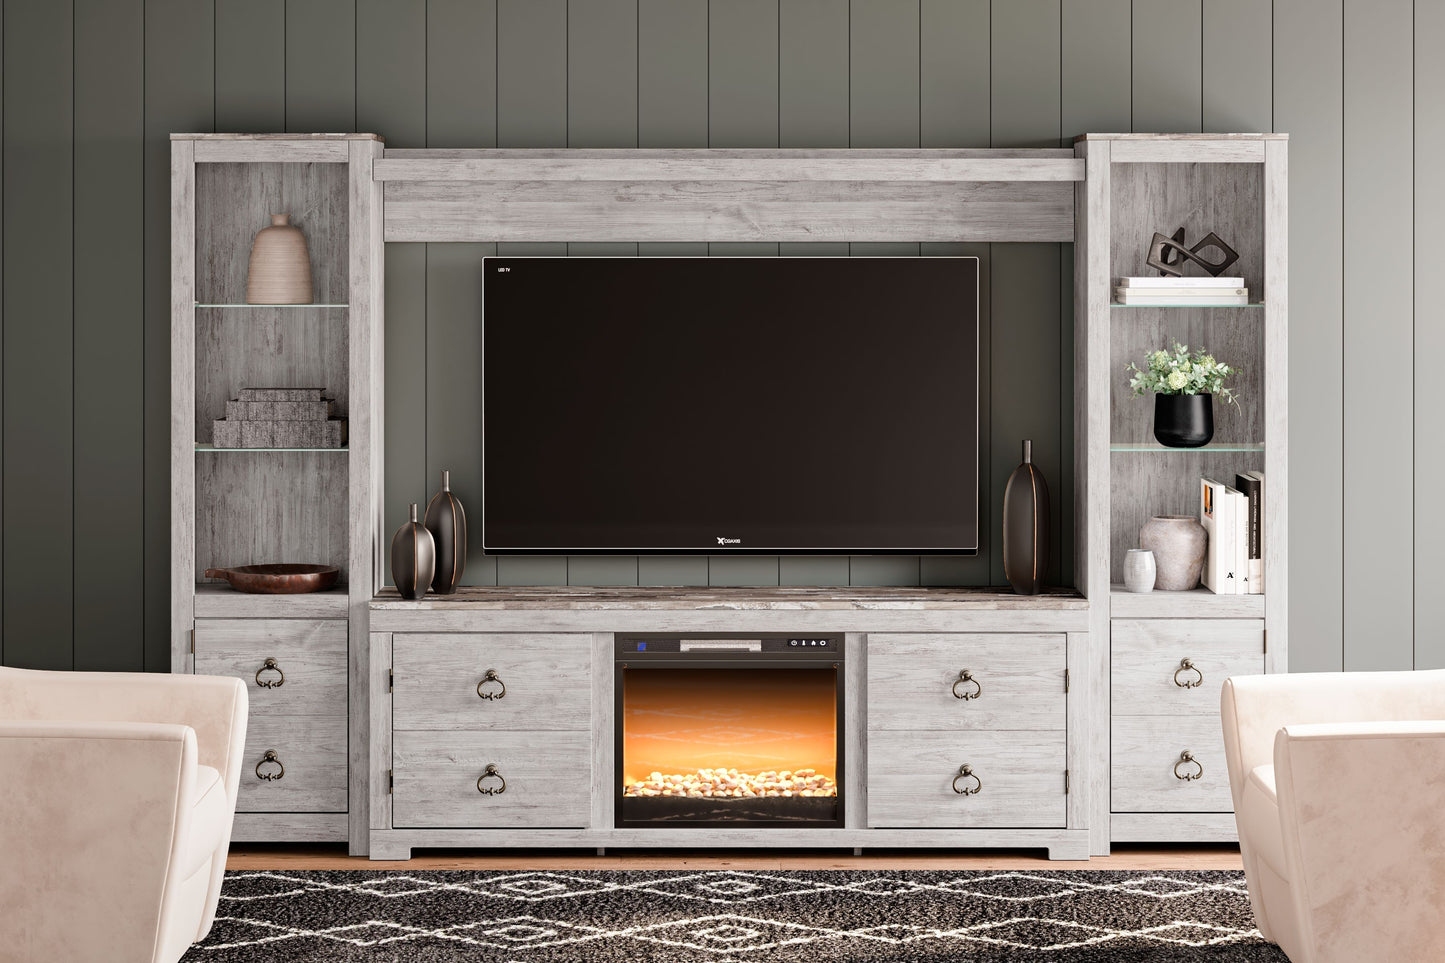 Willowton - Whitewash - 4-Piece Entertainment Center With 72" TV Stand And Glass/Stone Fireplace Insert